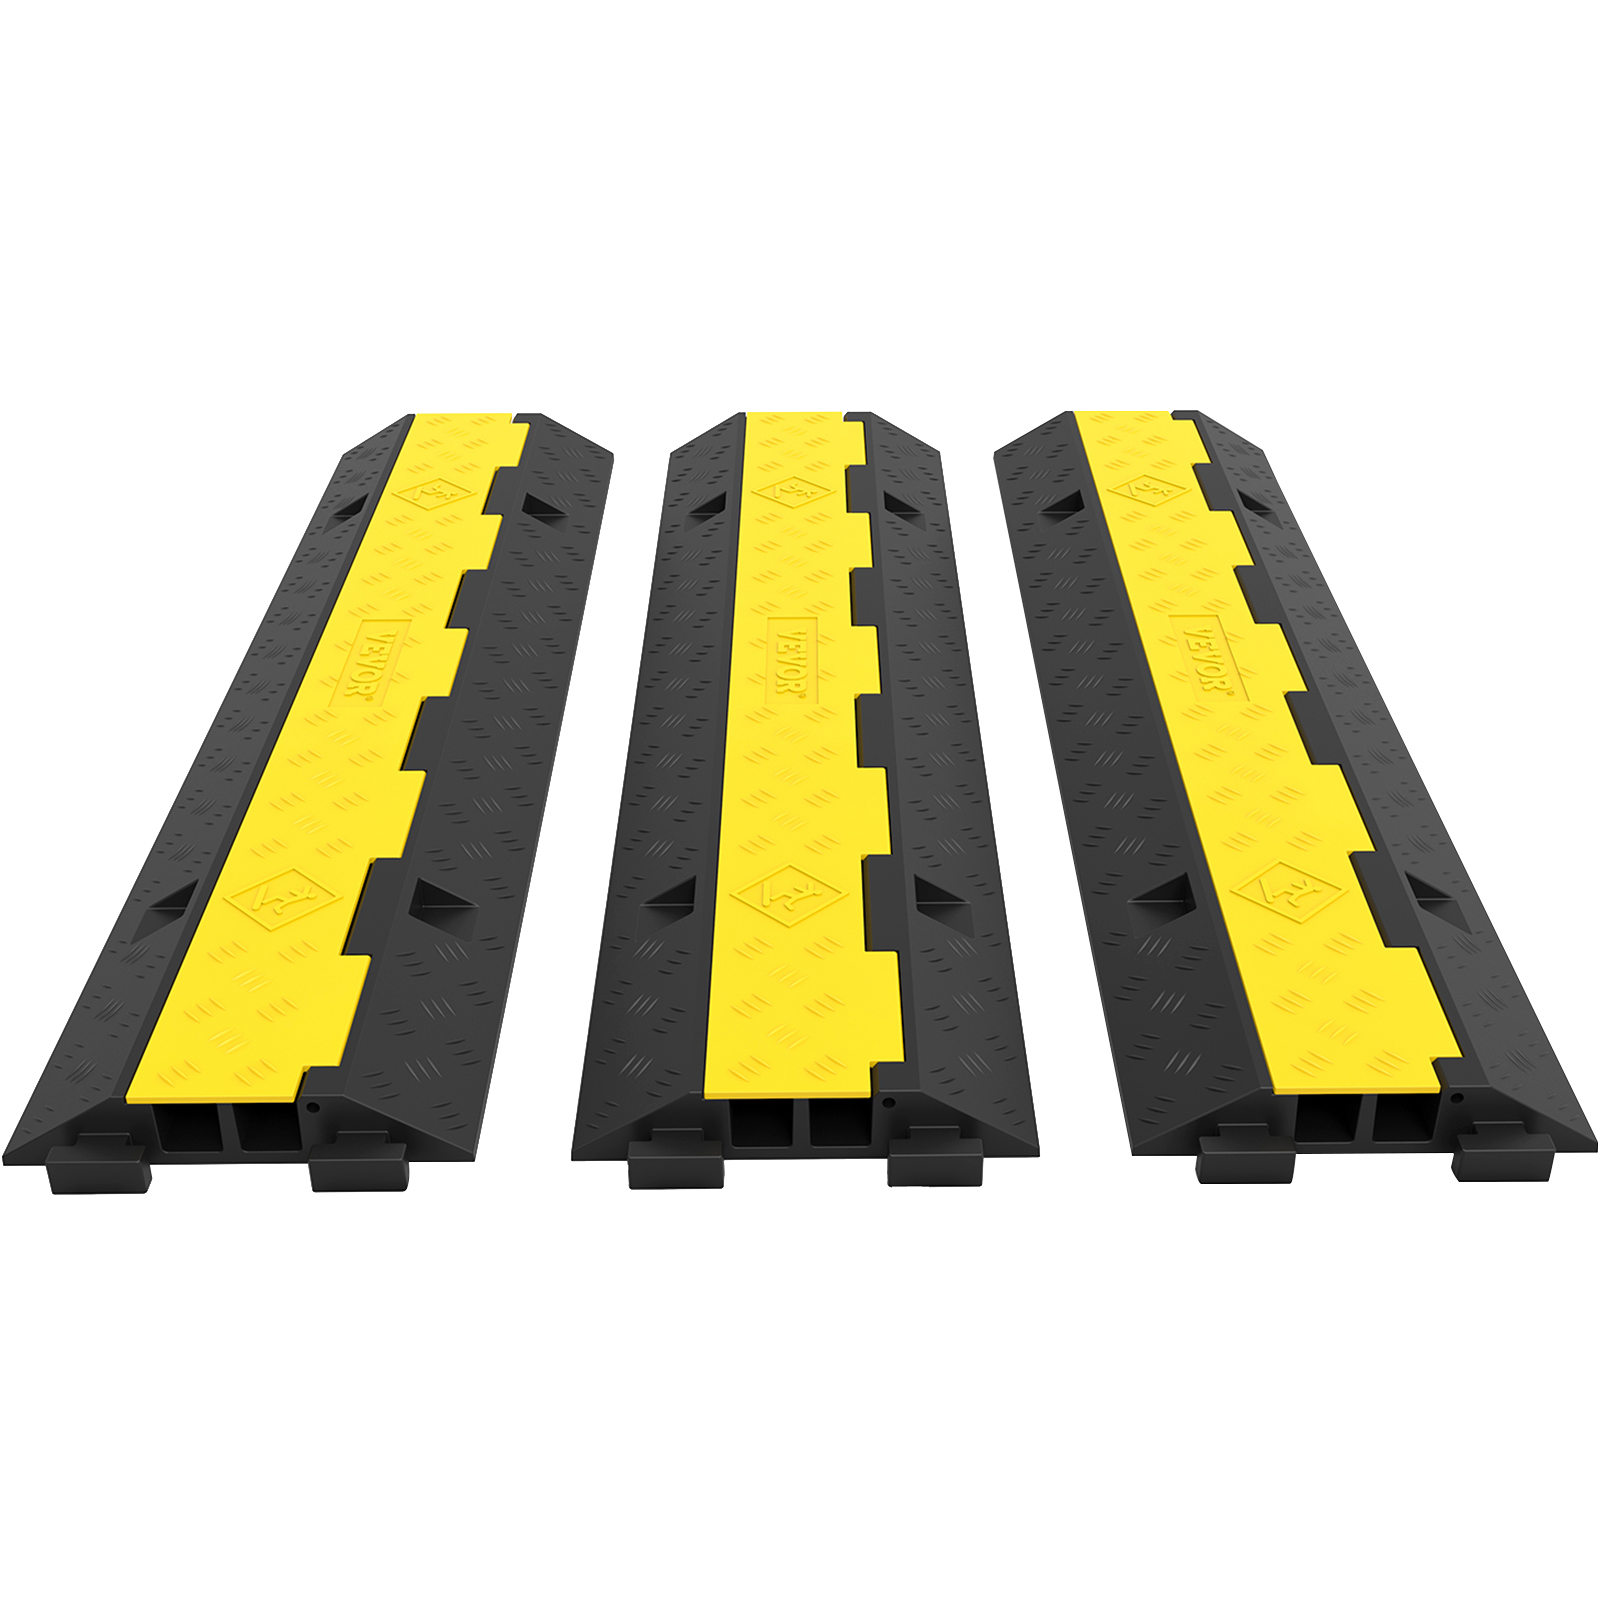 4pcs 1 Channel Rubber Electrical Wire Cable Cover Ramp Guard Cord Protector for sale online 